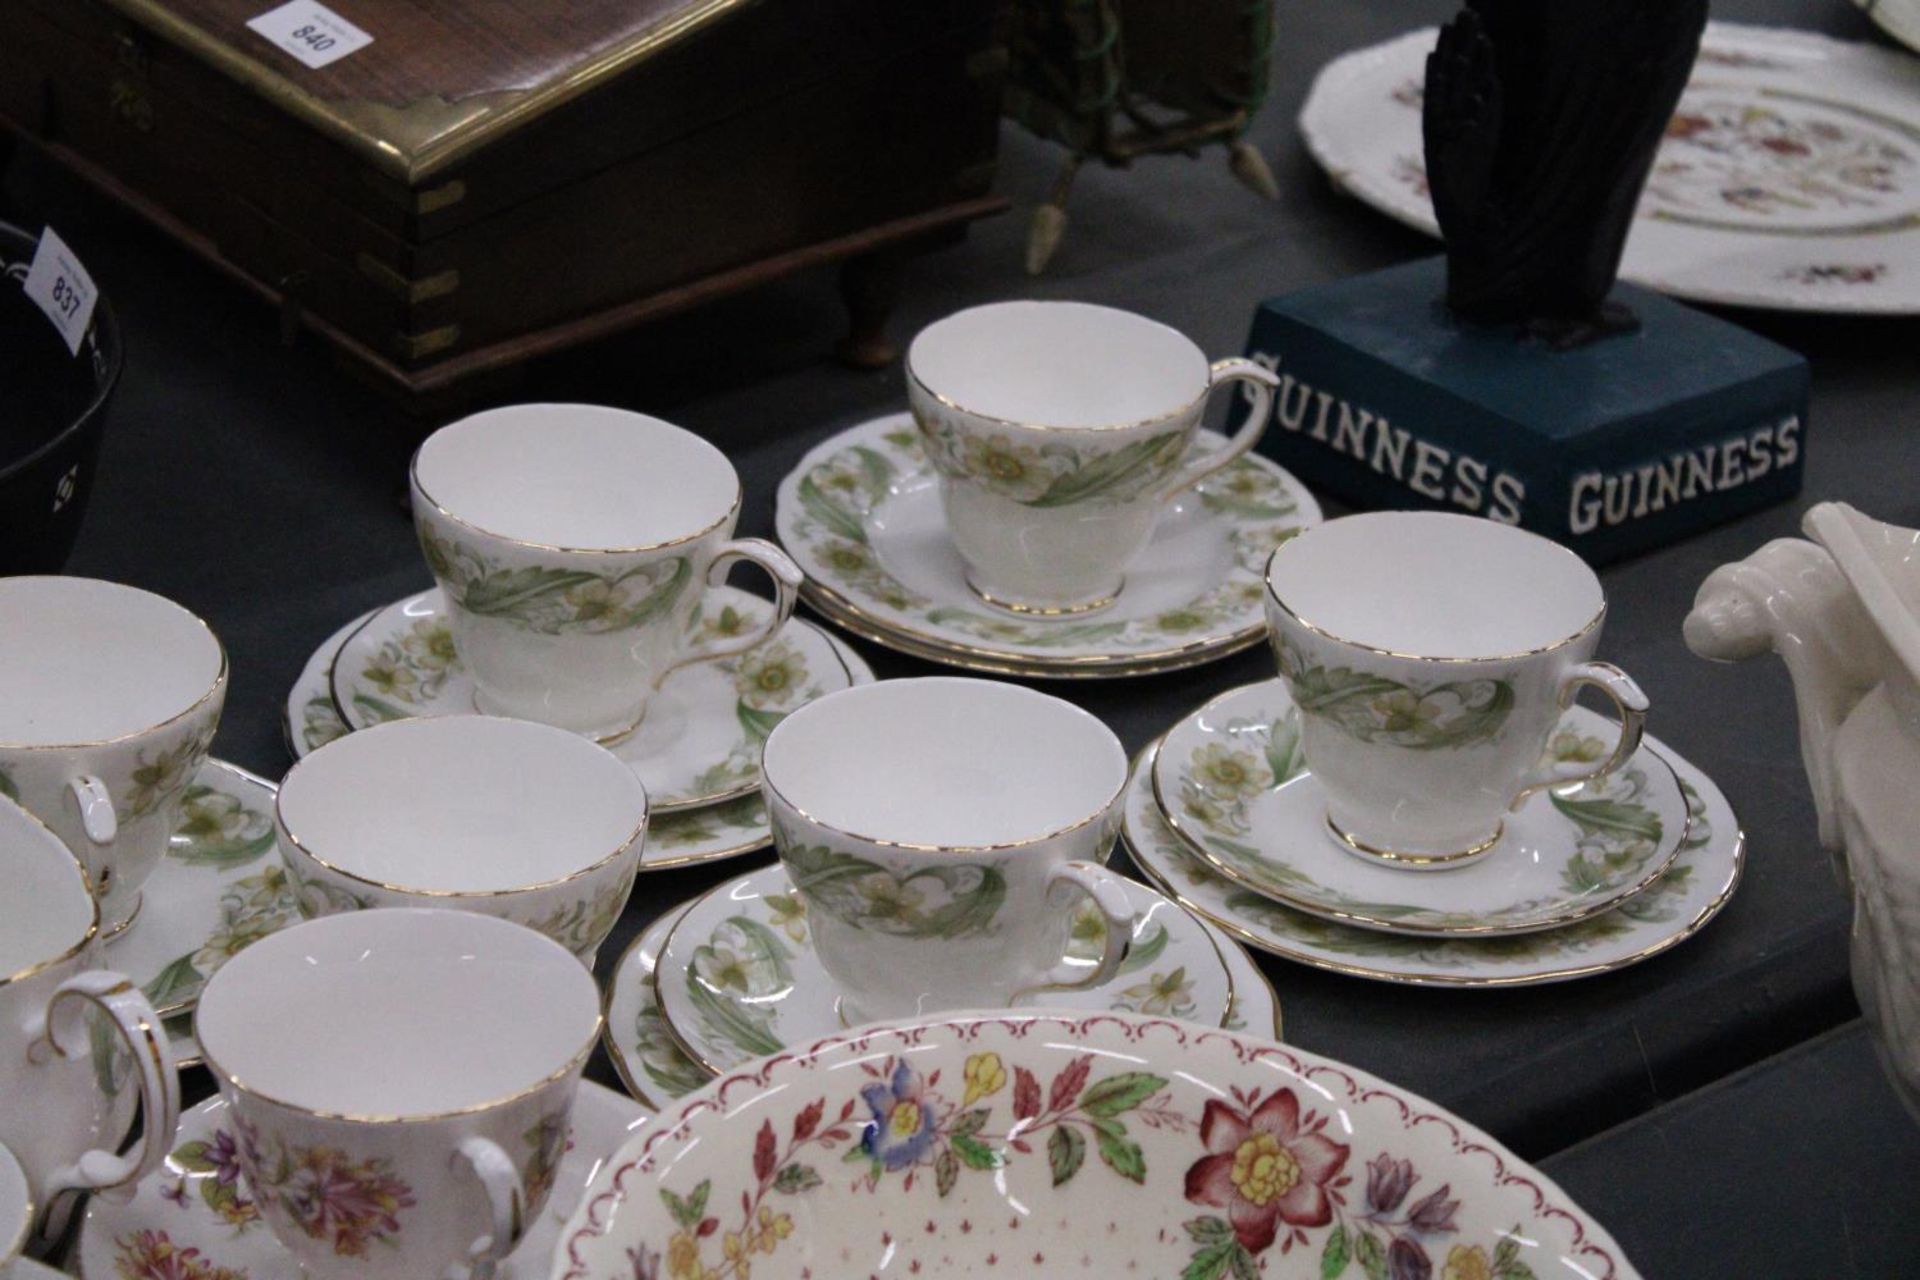 A QUANTITY OF CHINA CUPS, SAUCERS, SIDE PLATES AND CREAM JUGS BY COLCLOUGH AND DUCHESS - Image 6 of 6